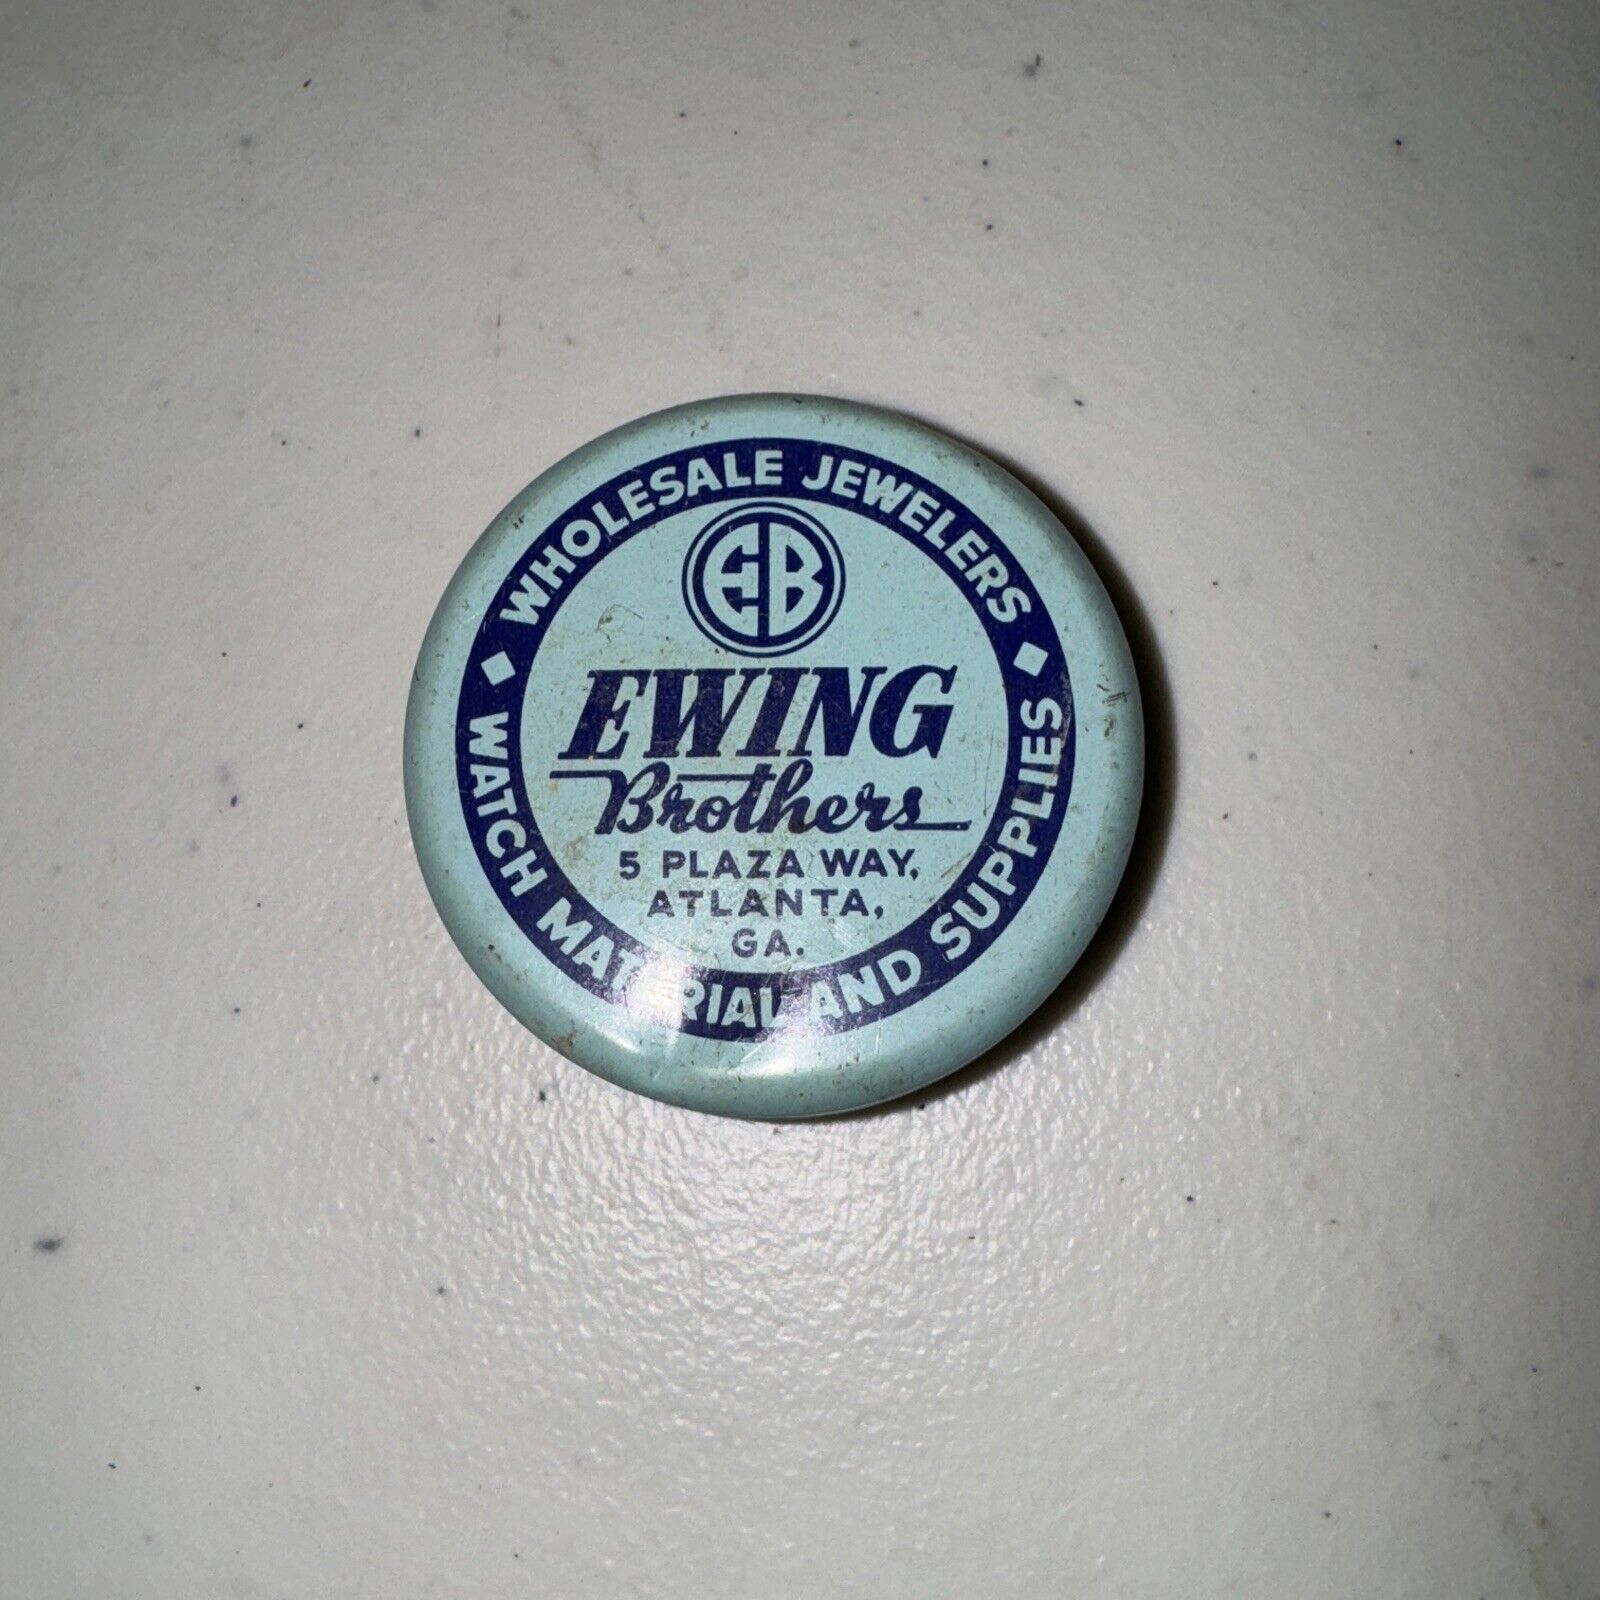 Vintage Ewing Brothers watch makers & jewelry supply small advertising tin-gear